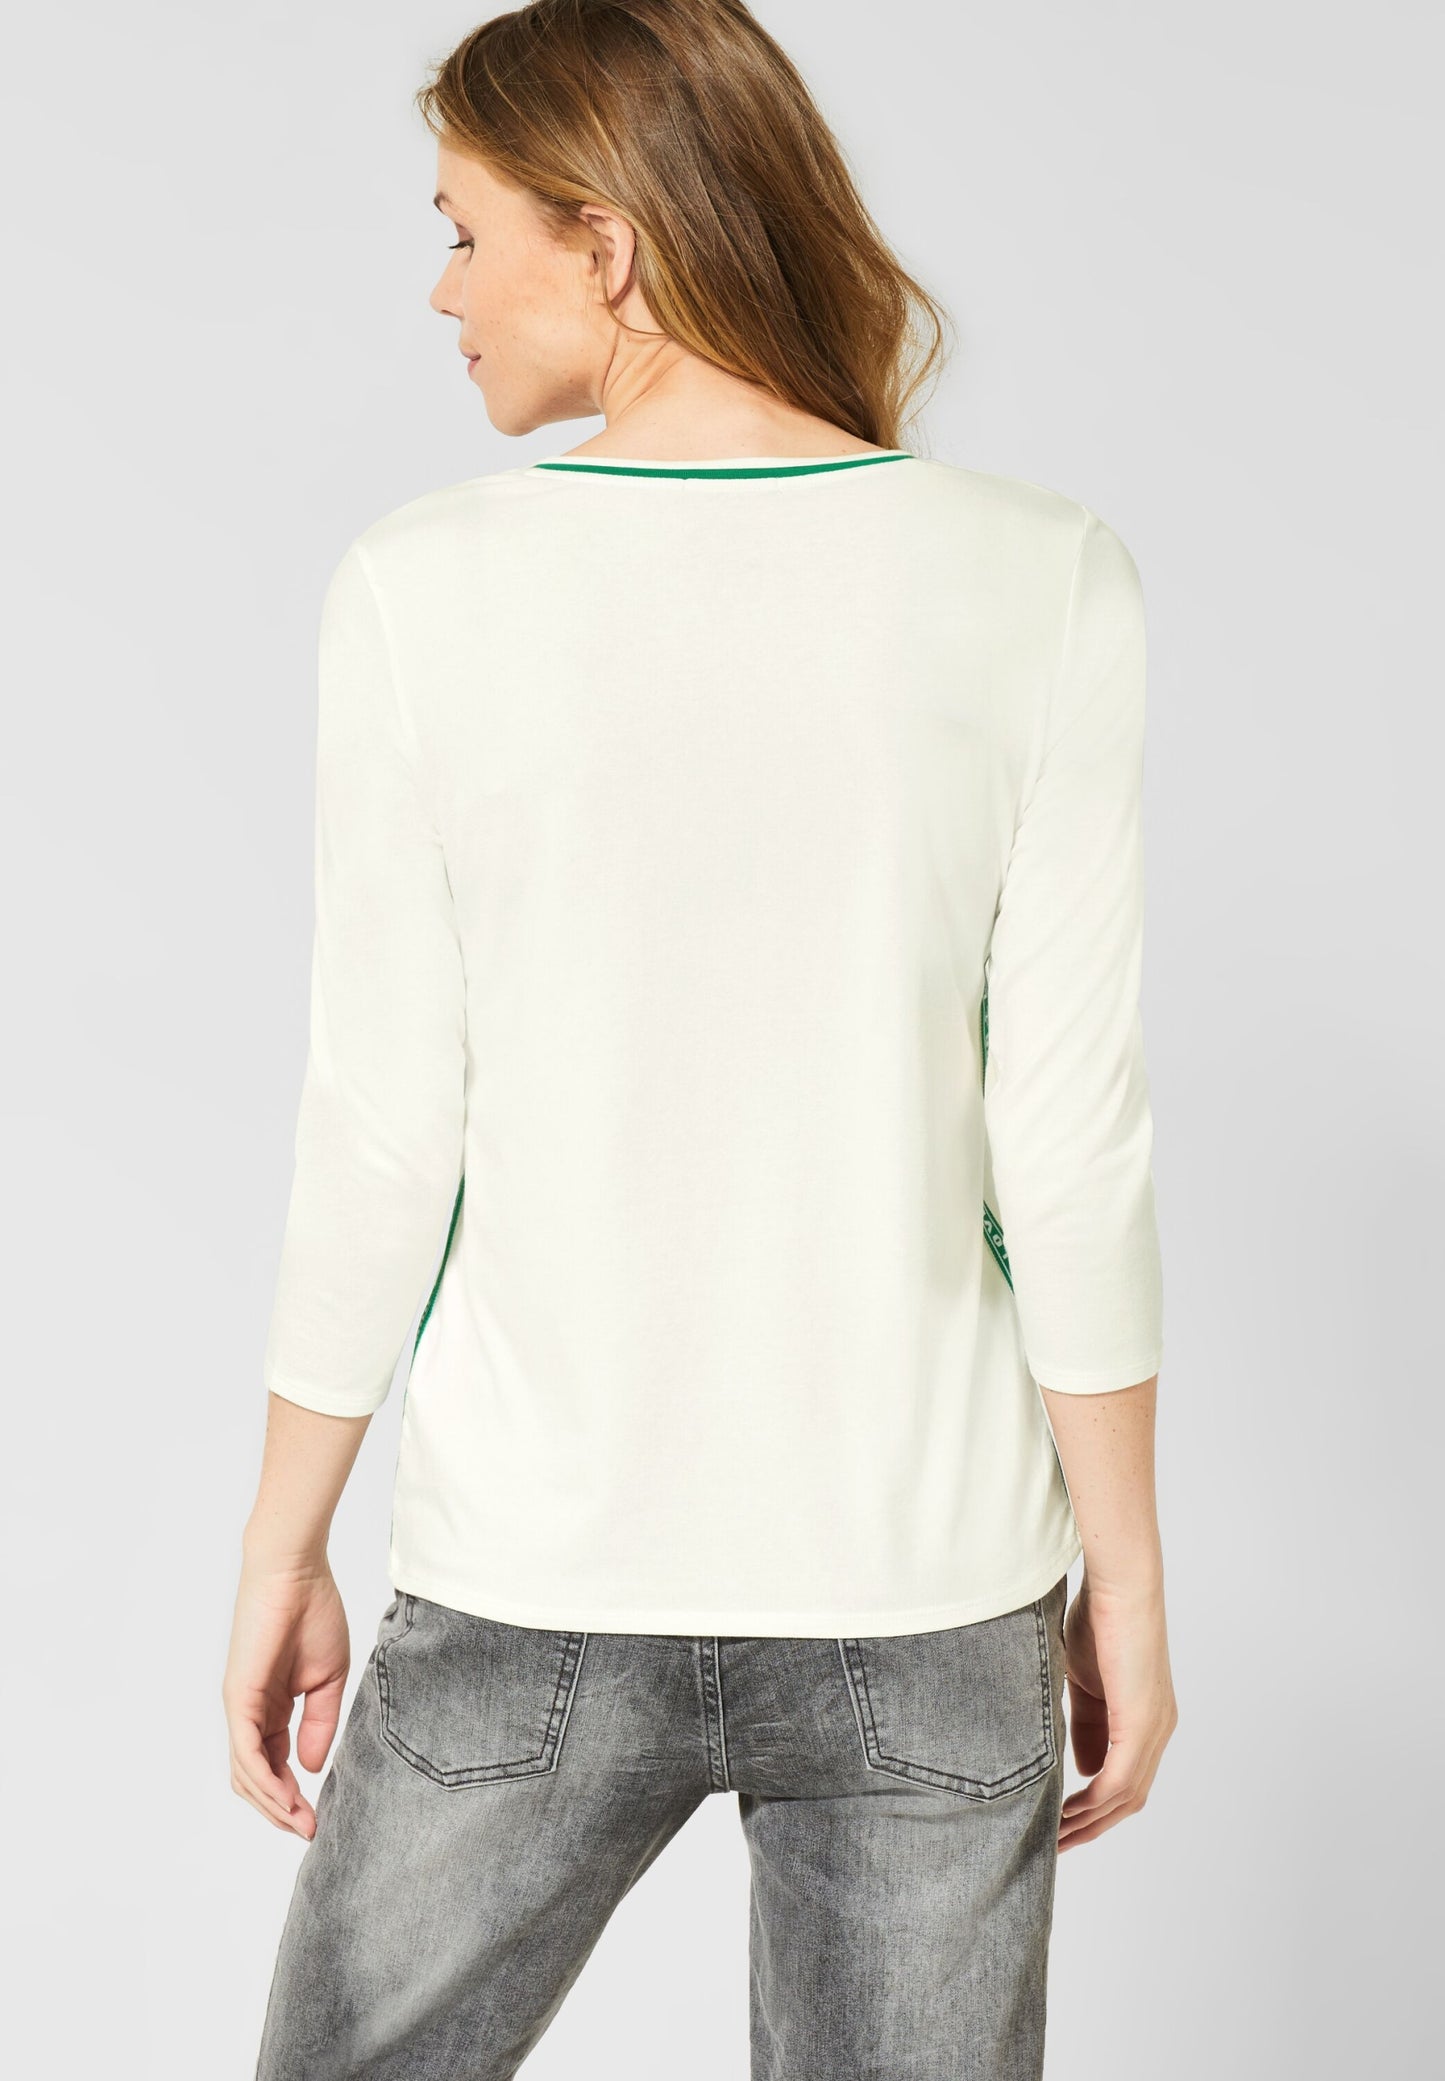 Shirt with side detail